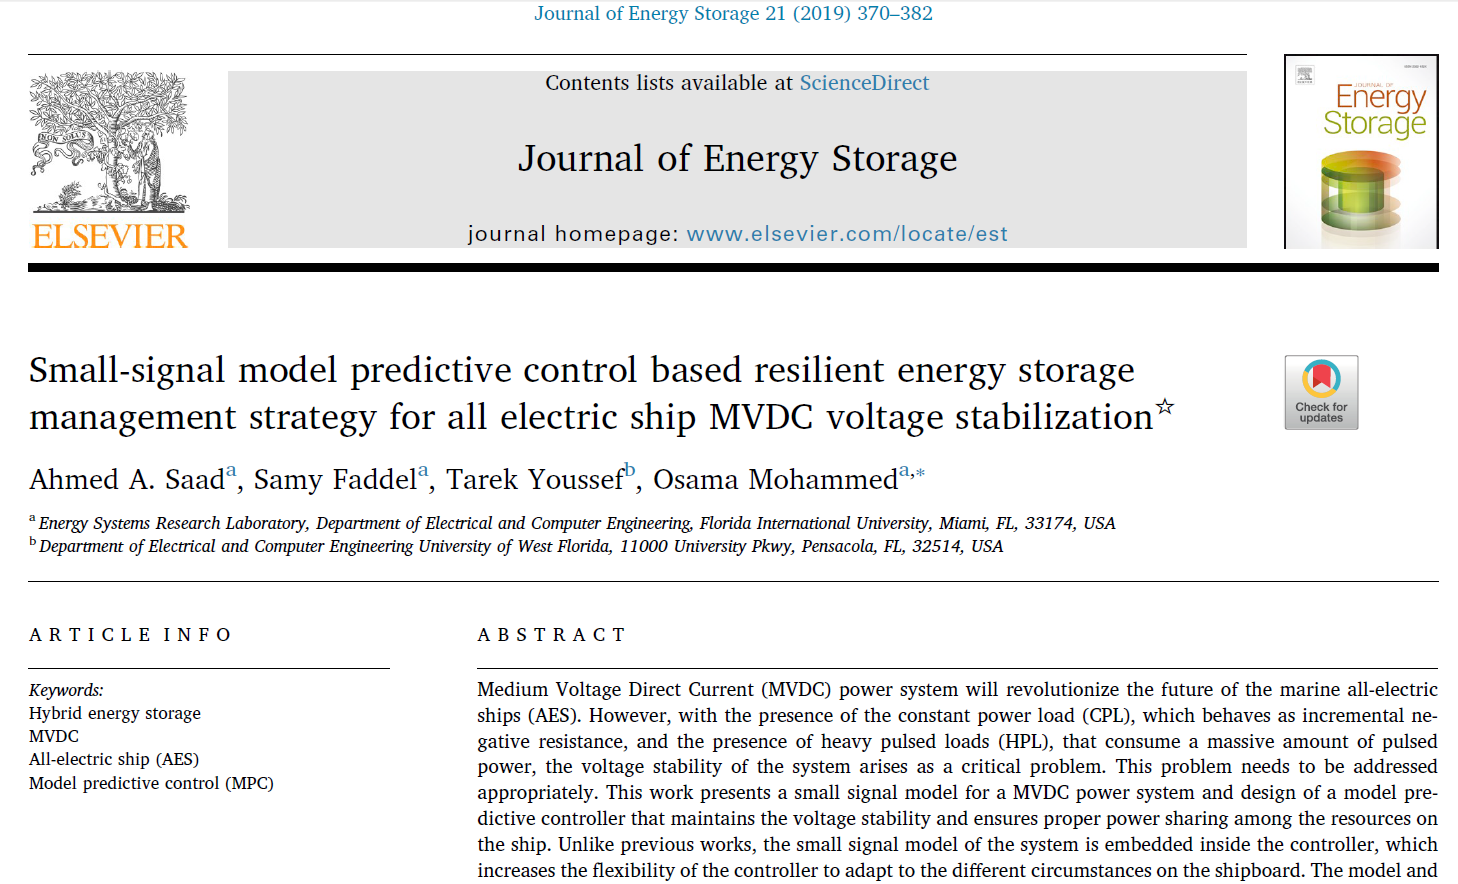 Small-signal model predictive control based resilient energy storage management strategy for all electric ship MVDC voltage stabilization